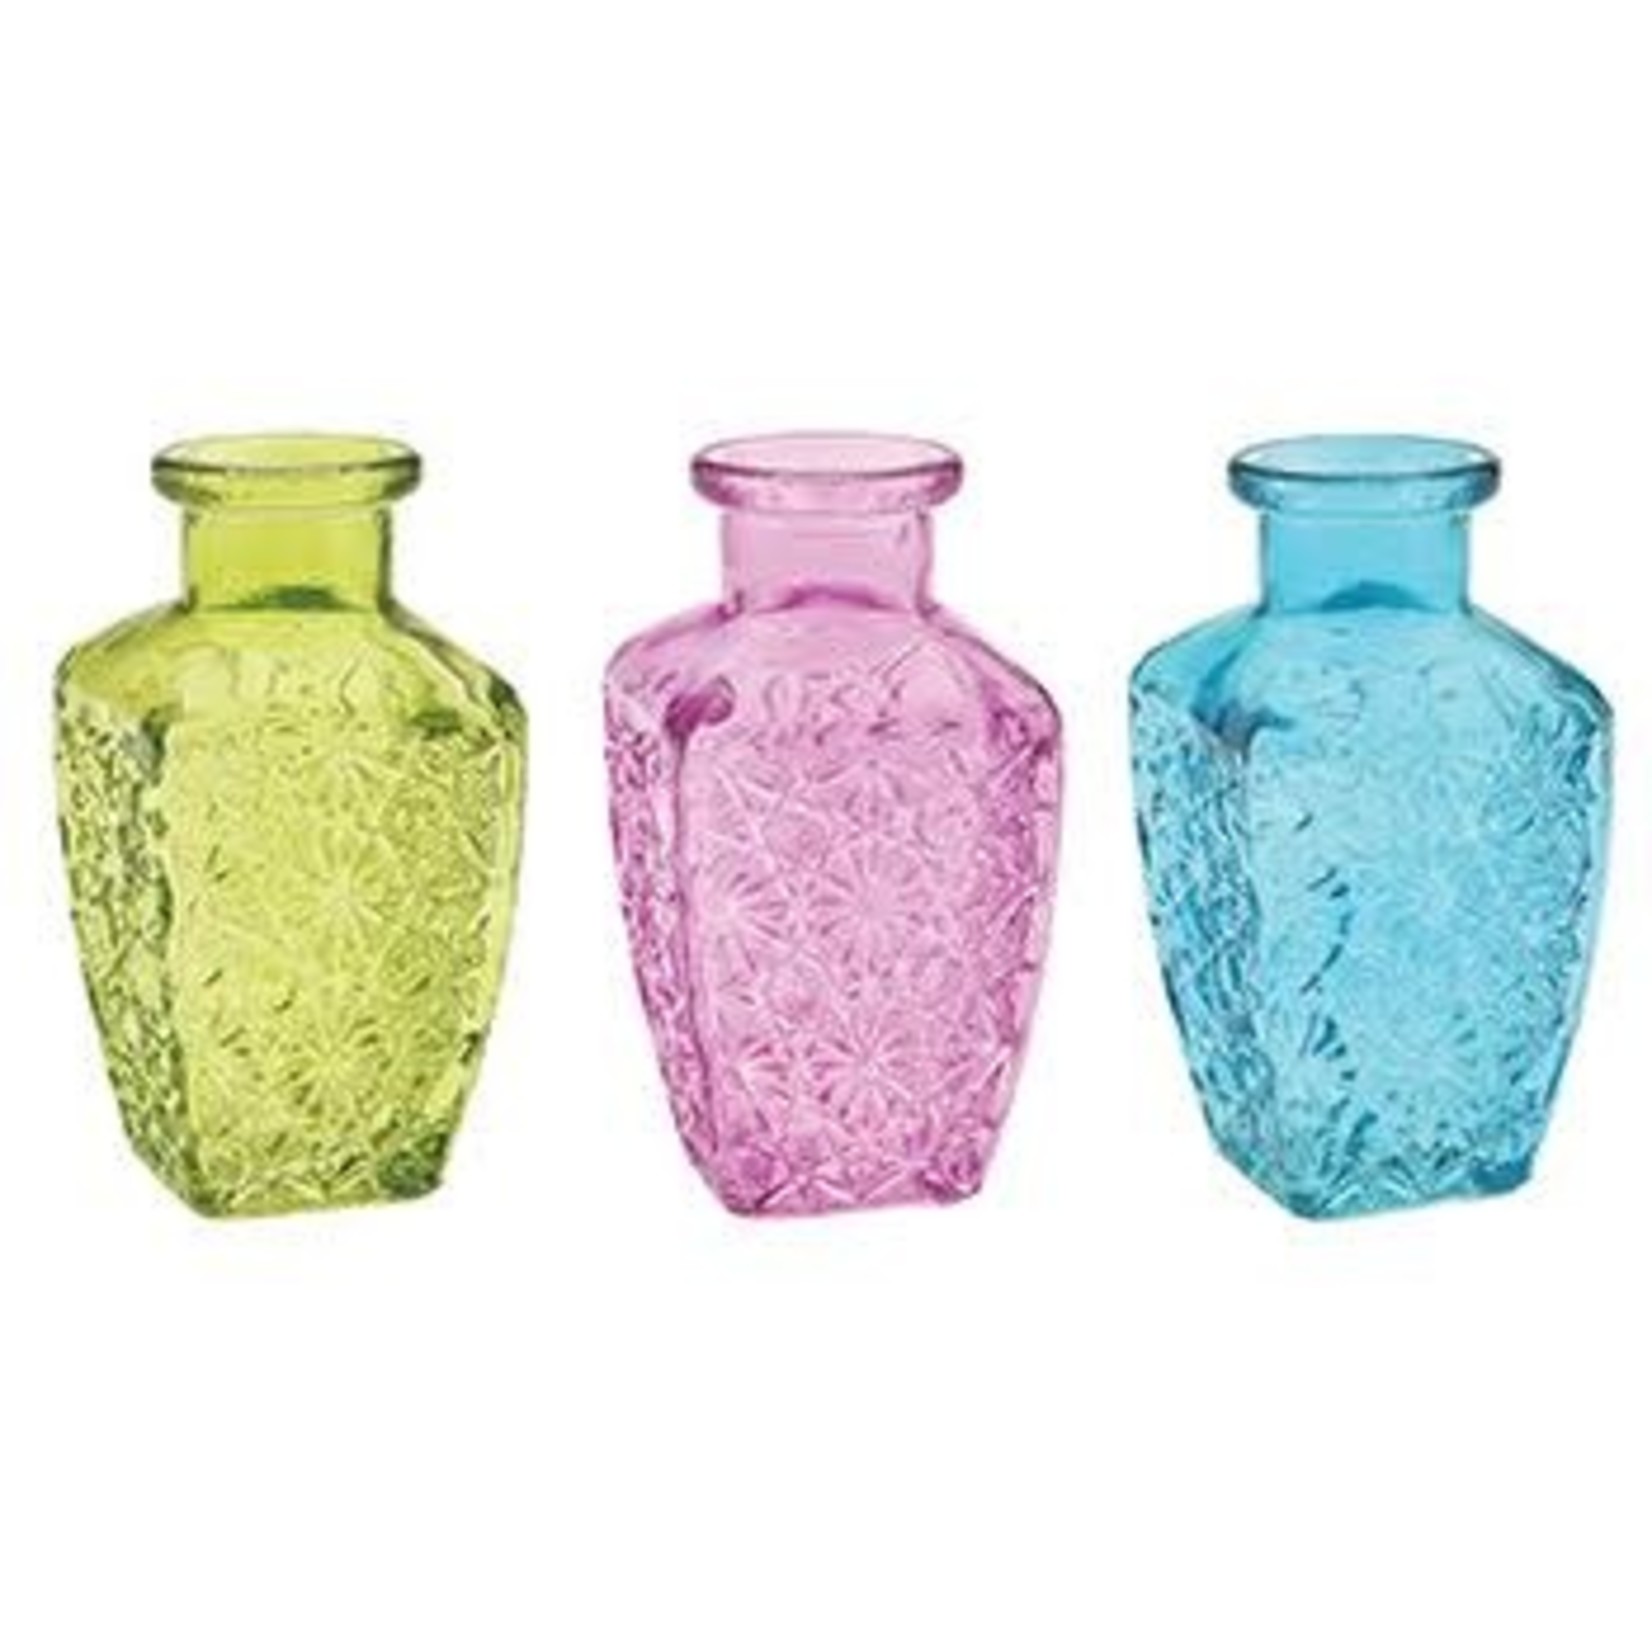 50% OFF WAS $3.50 NOW $1.75 5”H SQ SPRING EMB GLASS VASE